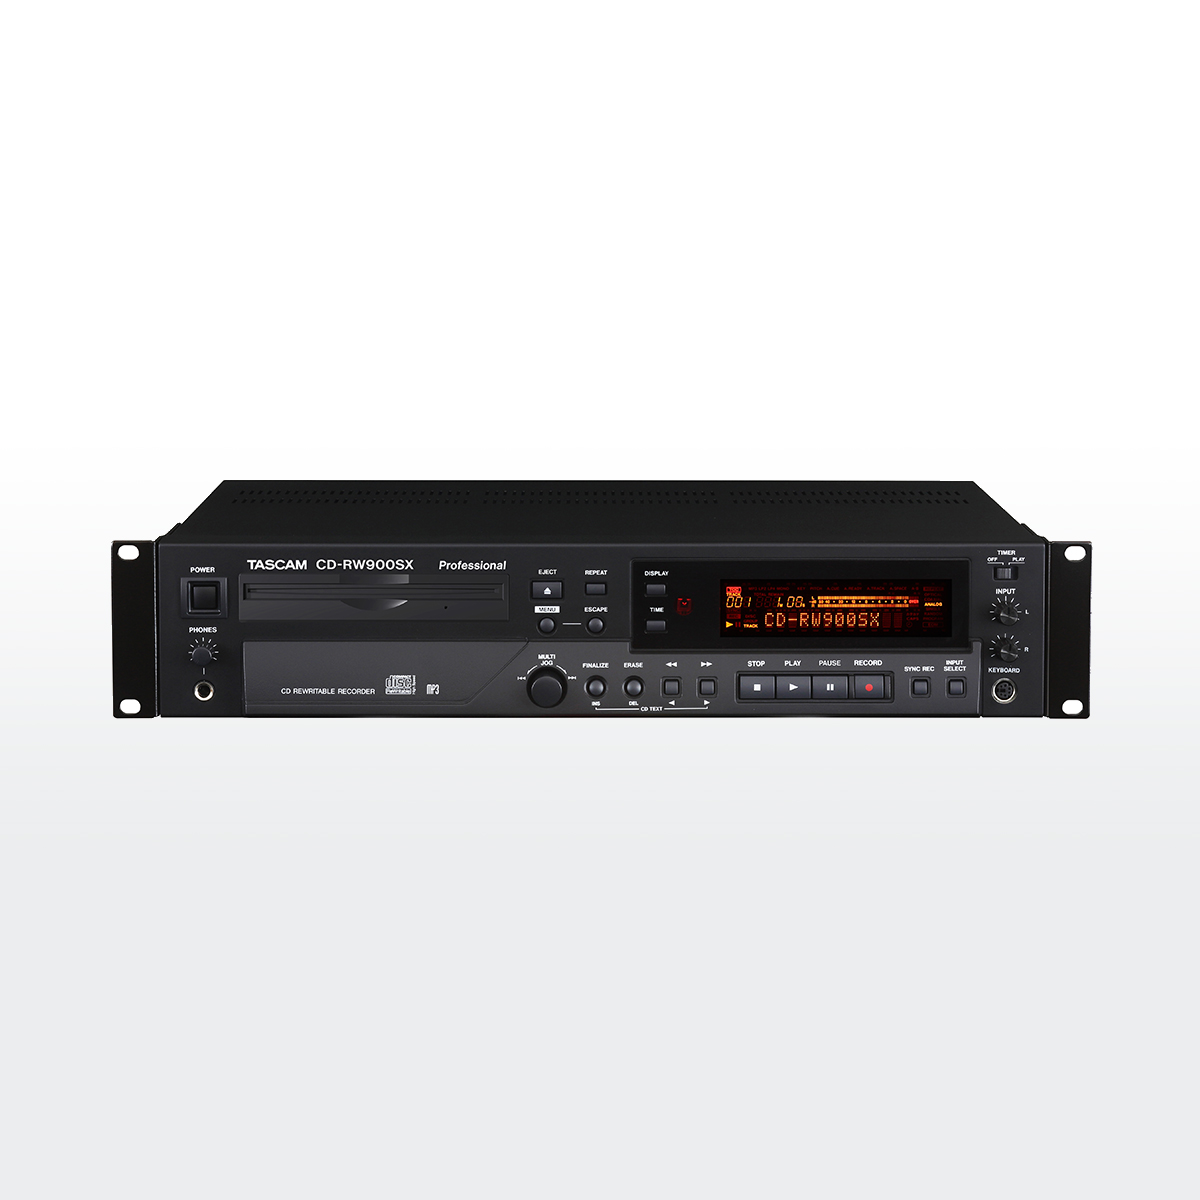 CD-RW900SX - New Upgraded Version 1.01 of Firmware Released